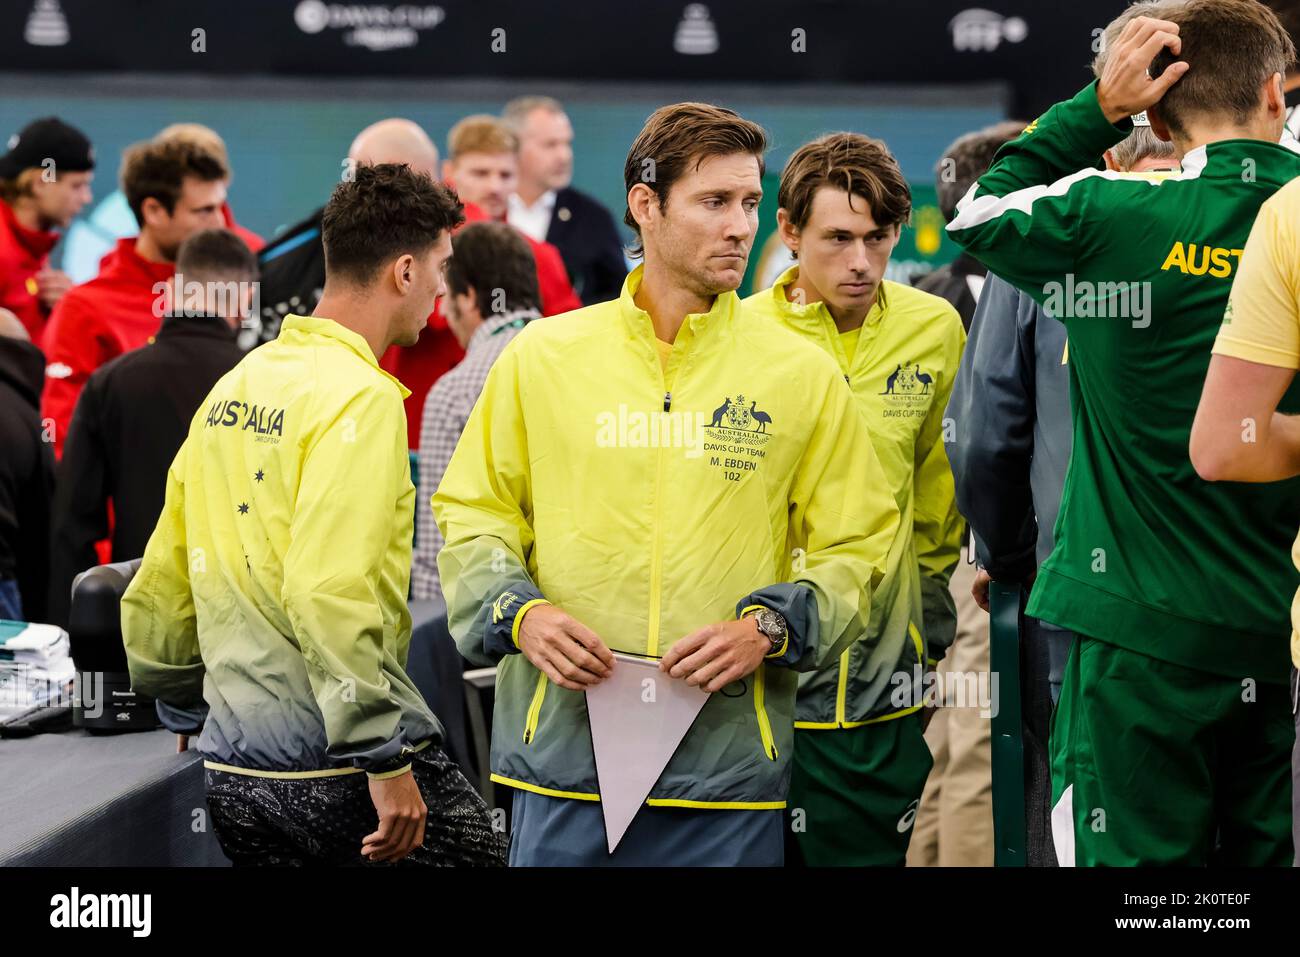 Hamburg, Germany, 13th Sep, 2022. Matthew Ebden (M) and the australian Team stand together during the group stage match between Belgium and Australia at the 2022 Davis Cup finals in Hamburg, Germany. Photo credit: Frank Molter/Alamy Live news Stock Photo